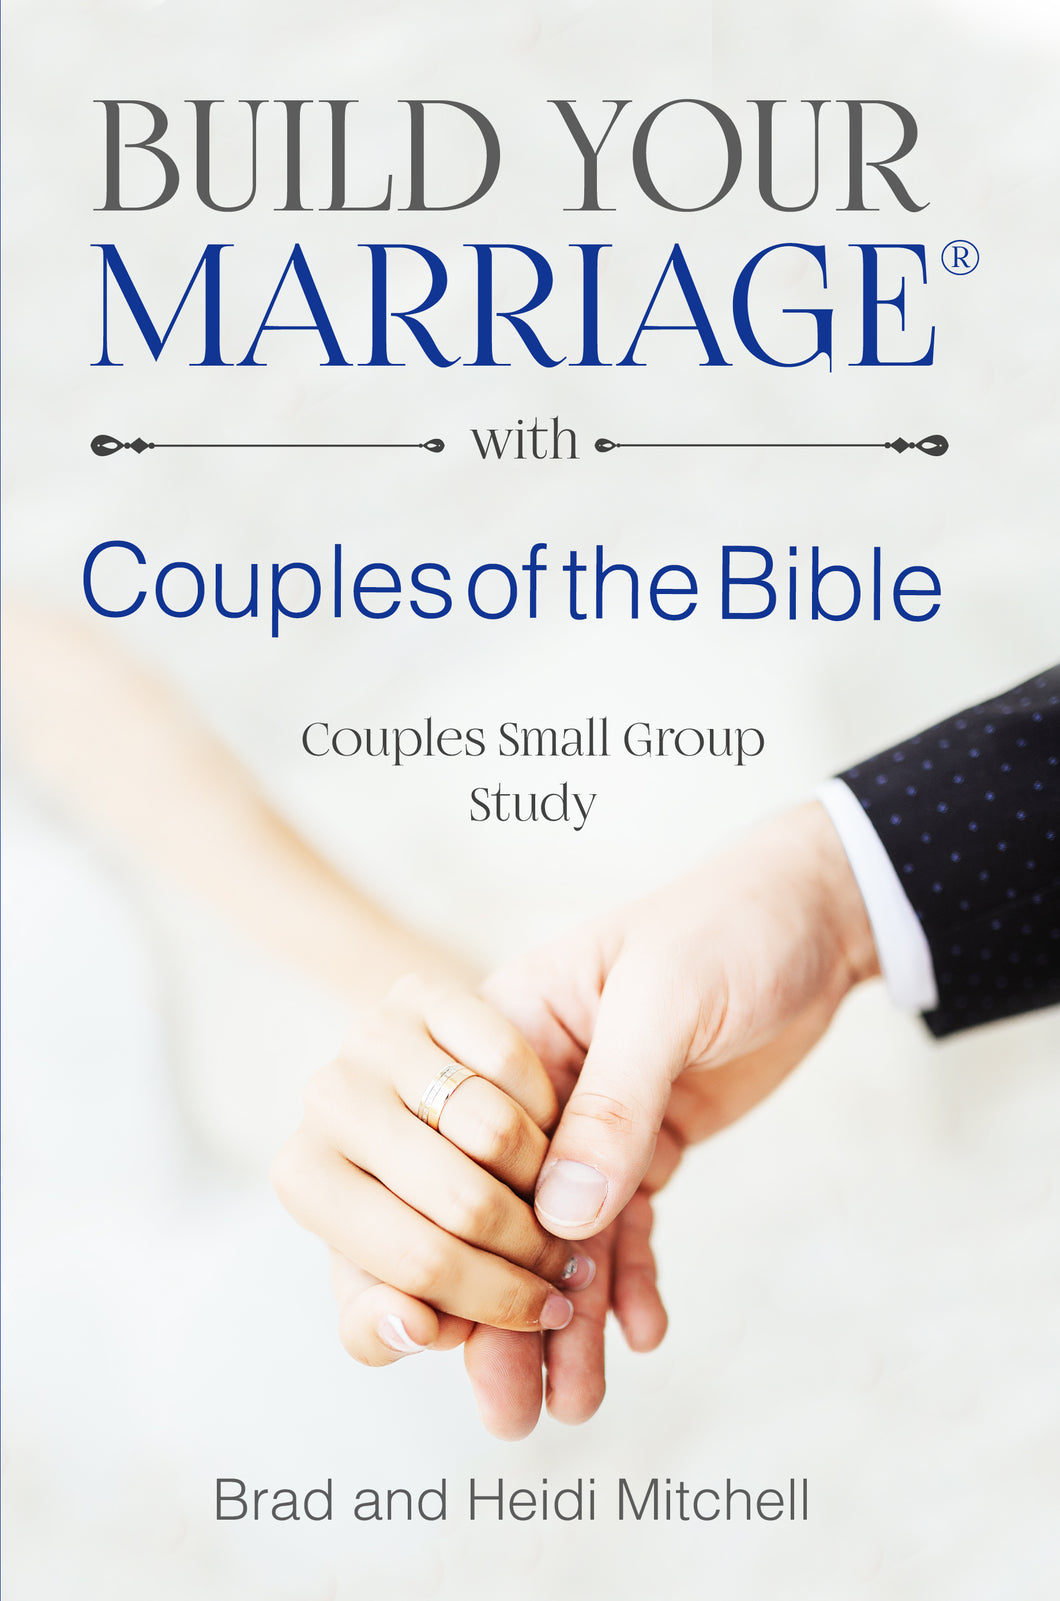 BYM-Build Your Marriage with Couples of the Bible-Couples Small Group Study